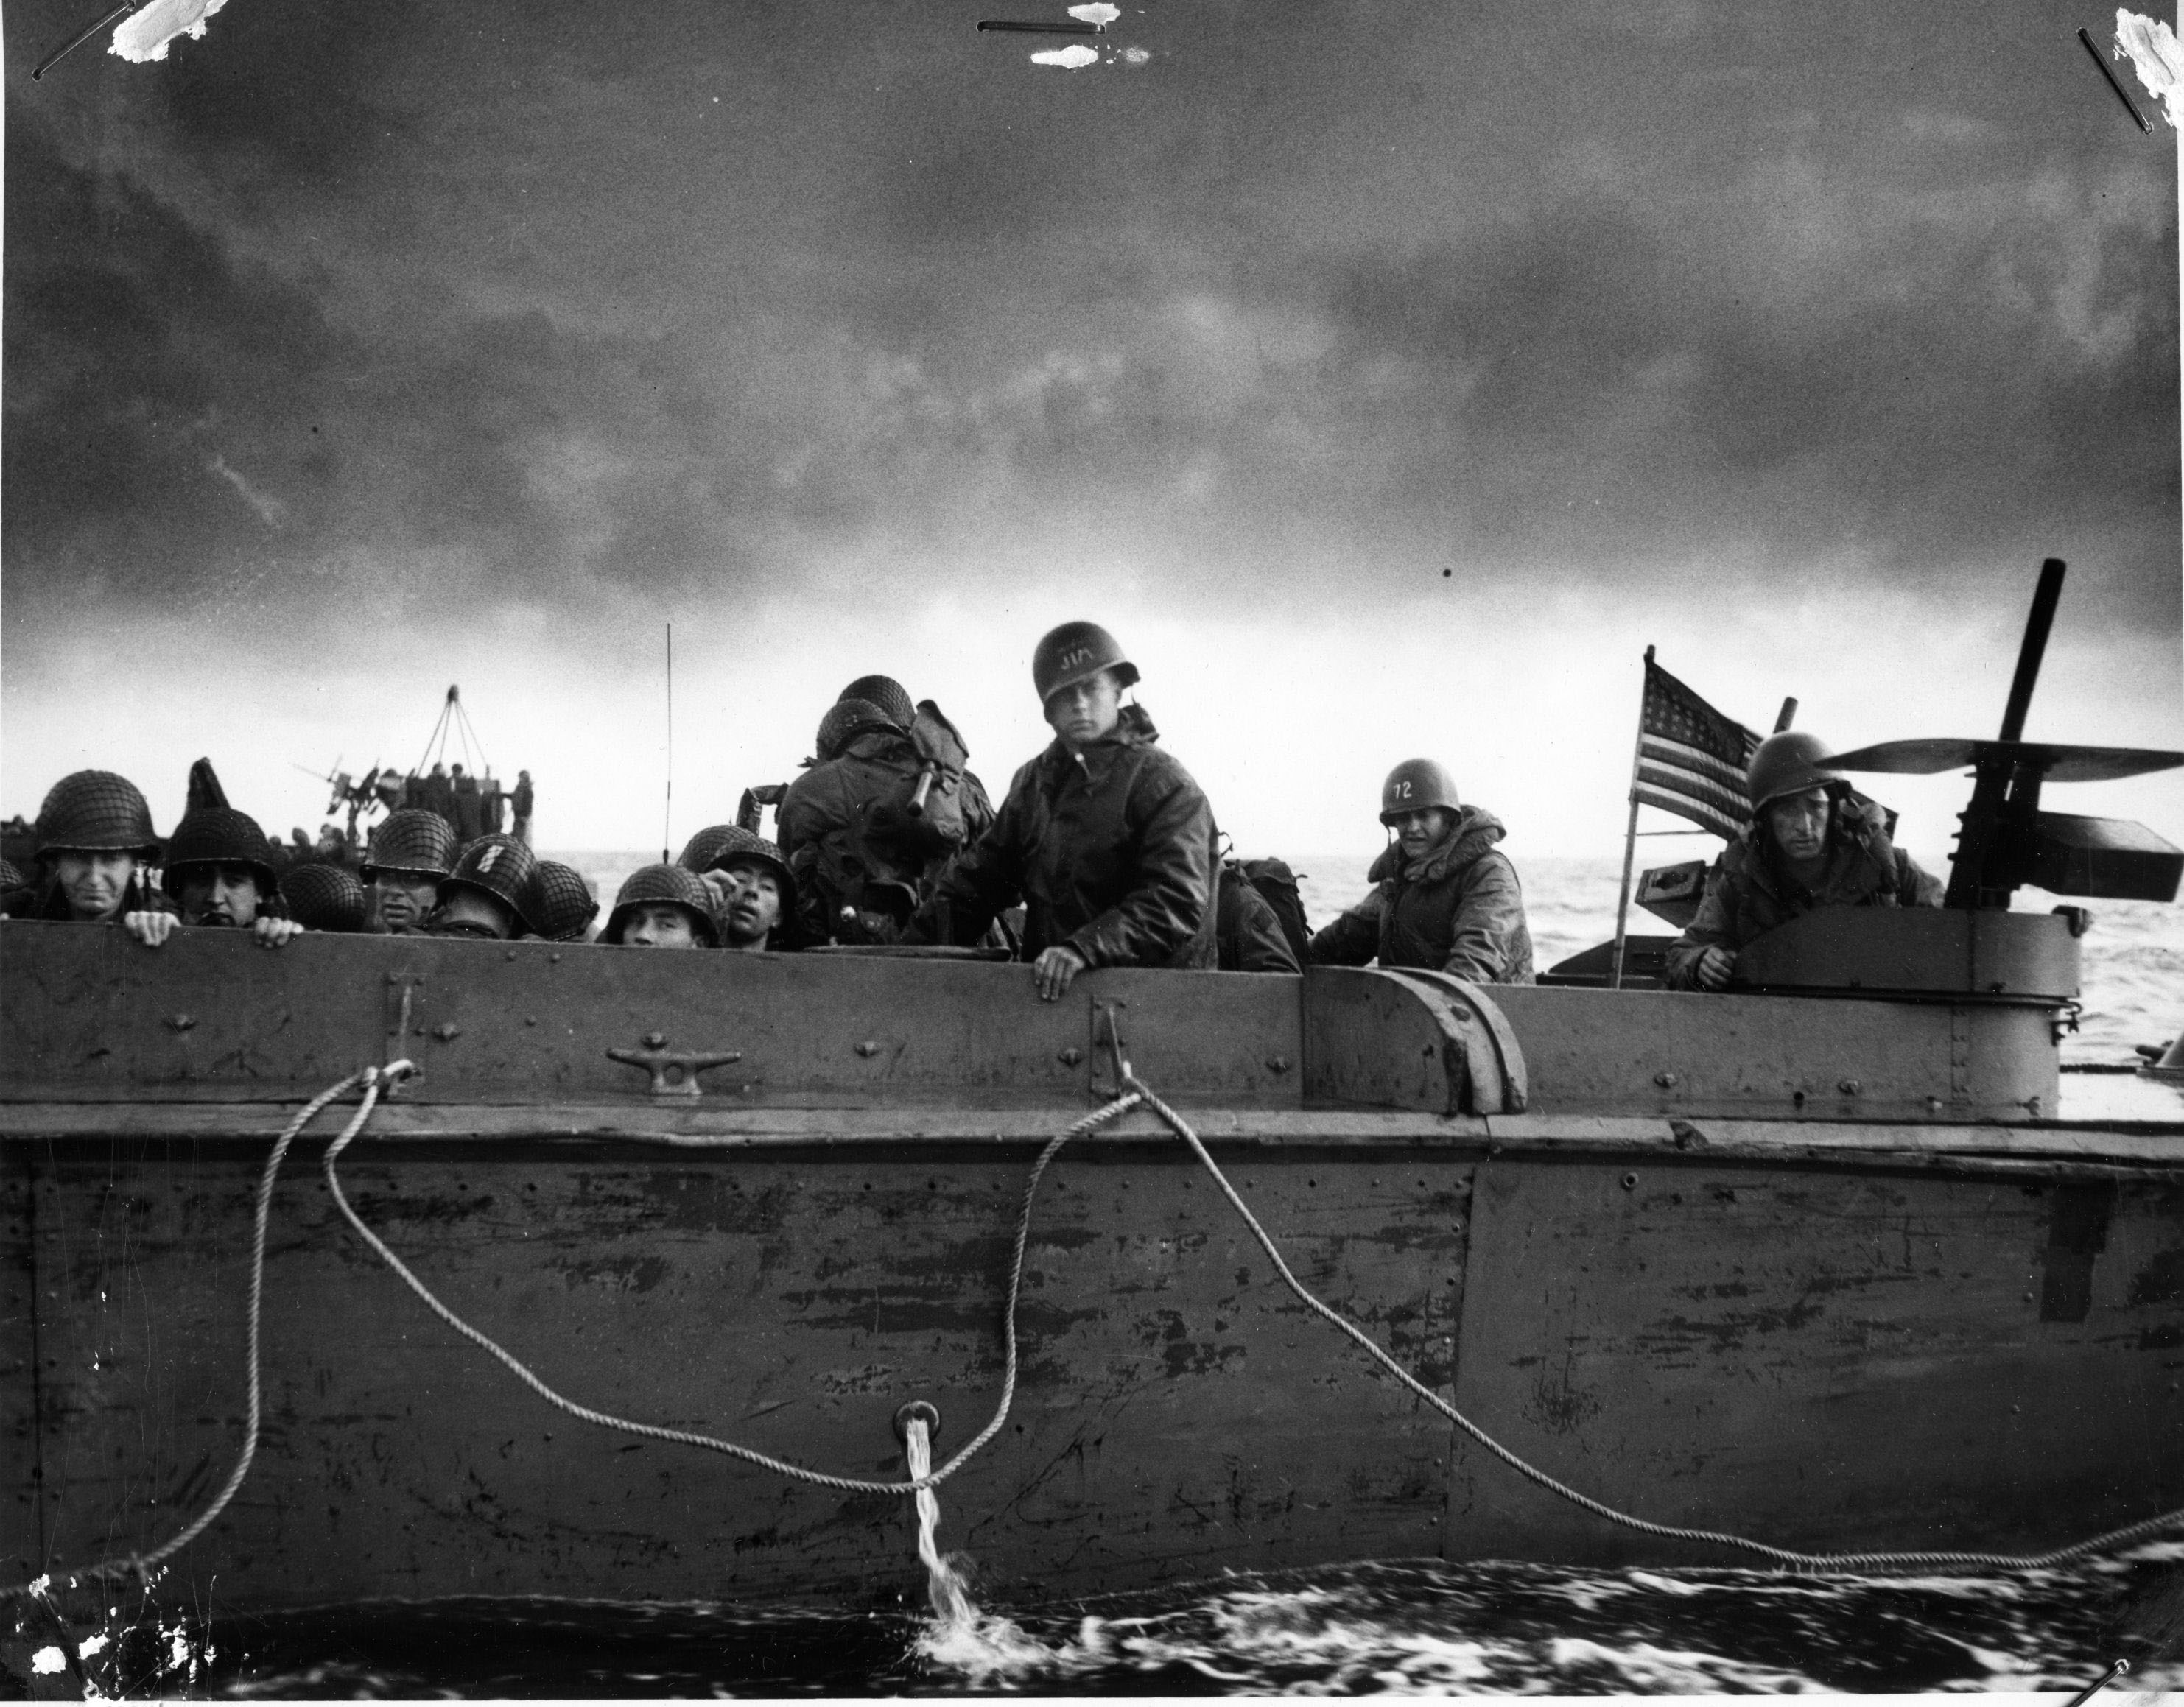 Soldiers looking over the top of a boat during D-Day